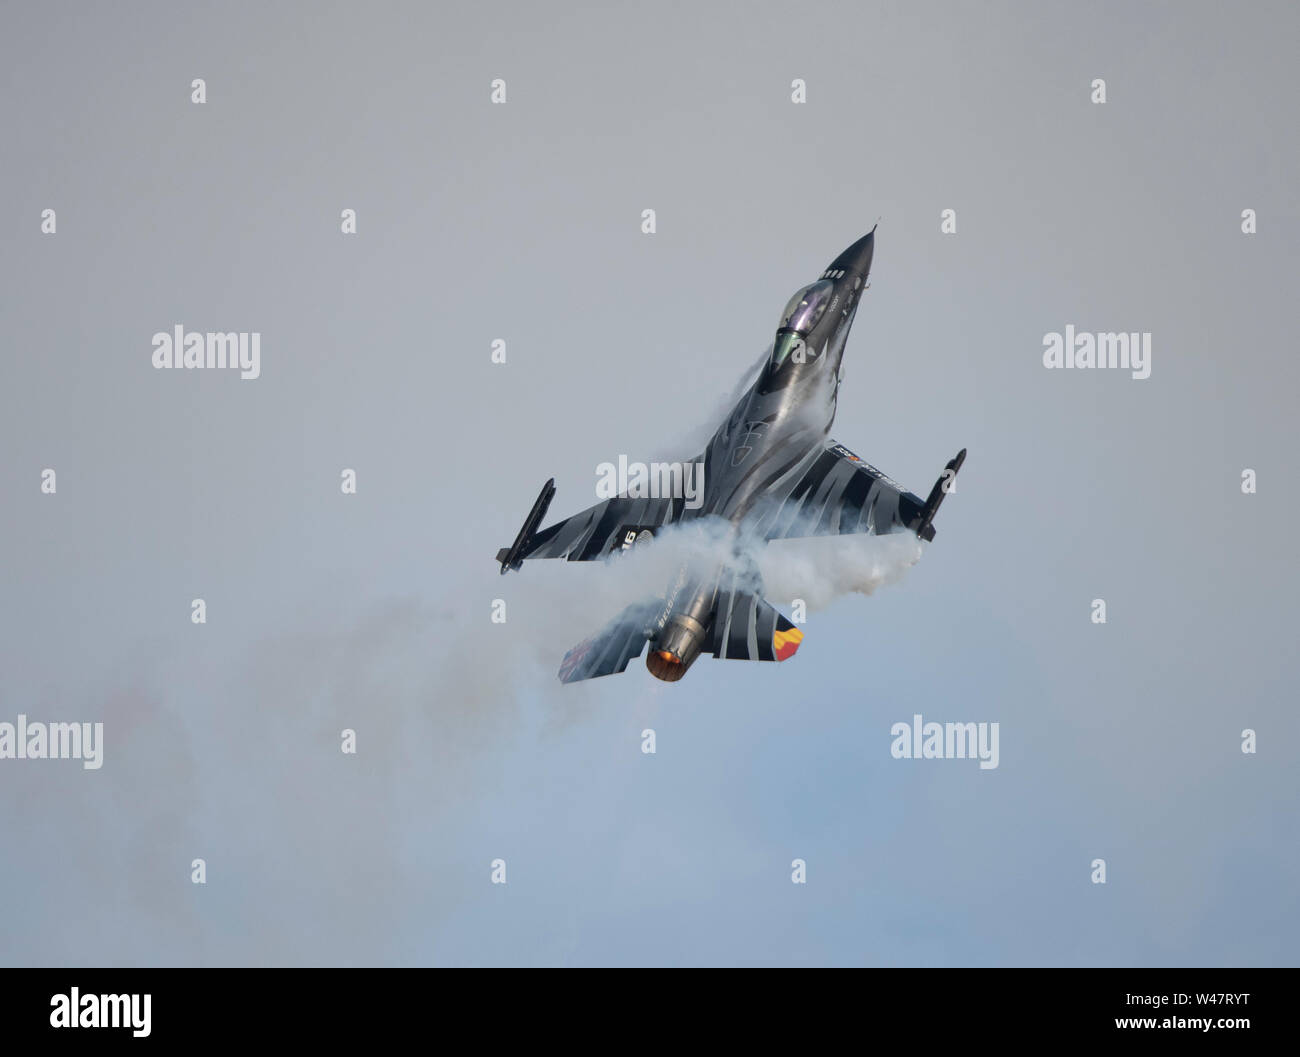 RAF Fairford, Glos, UK. 20th July 2019. Day 2 of The Royal International Air Tattoo (RIAT) with military aircraft from around the world assembling for the world’s greatest airshow with a full flying display in good weather. Image: Belgian Air Component F-16 Fighting Falcon demonstration. Credit: Malcolm Park/Alamy Live News. Stock Photo